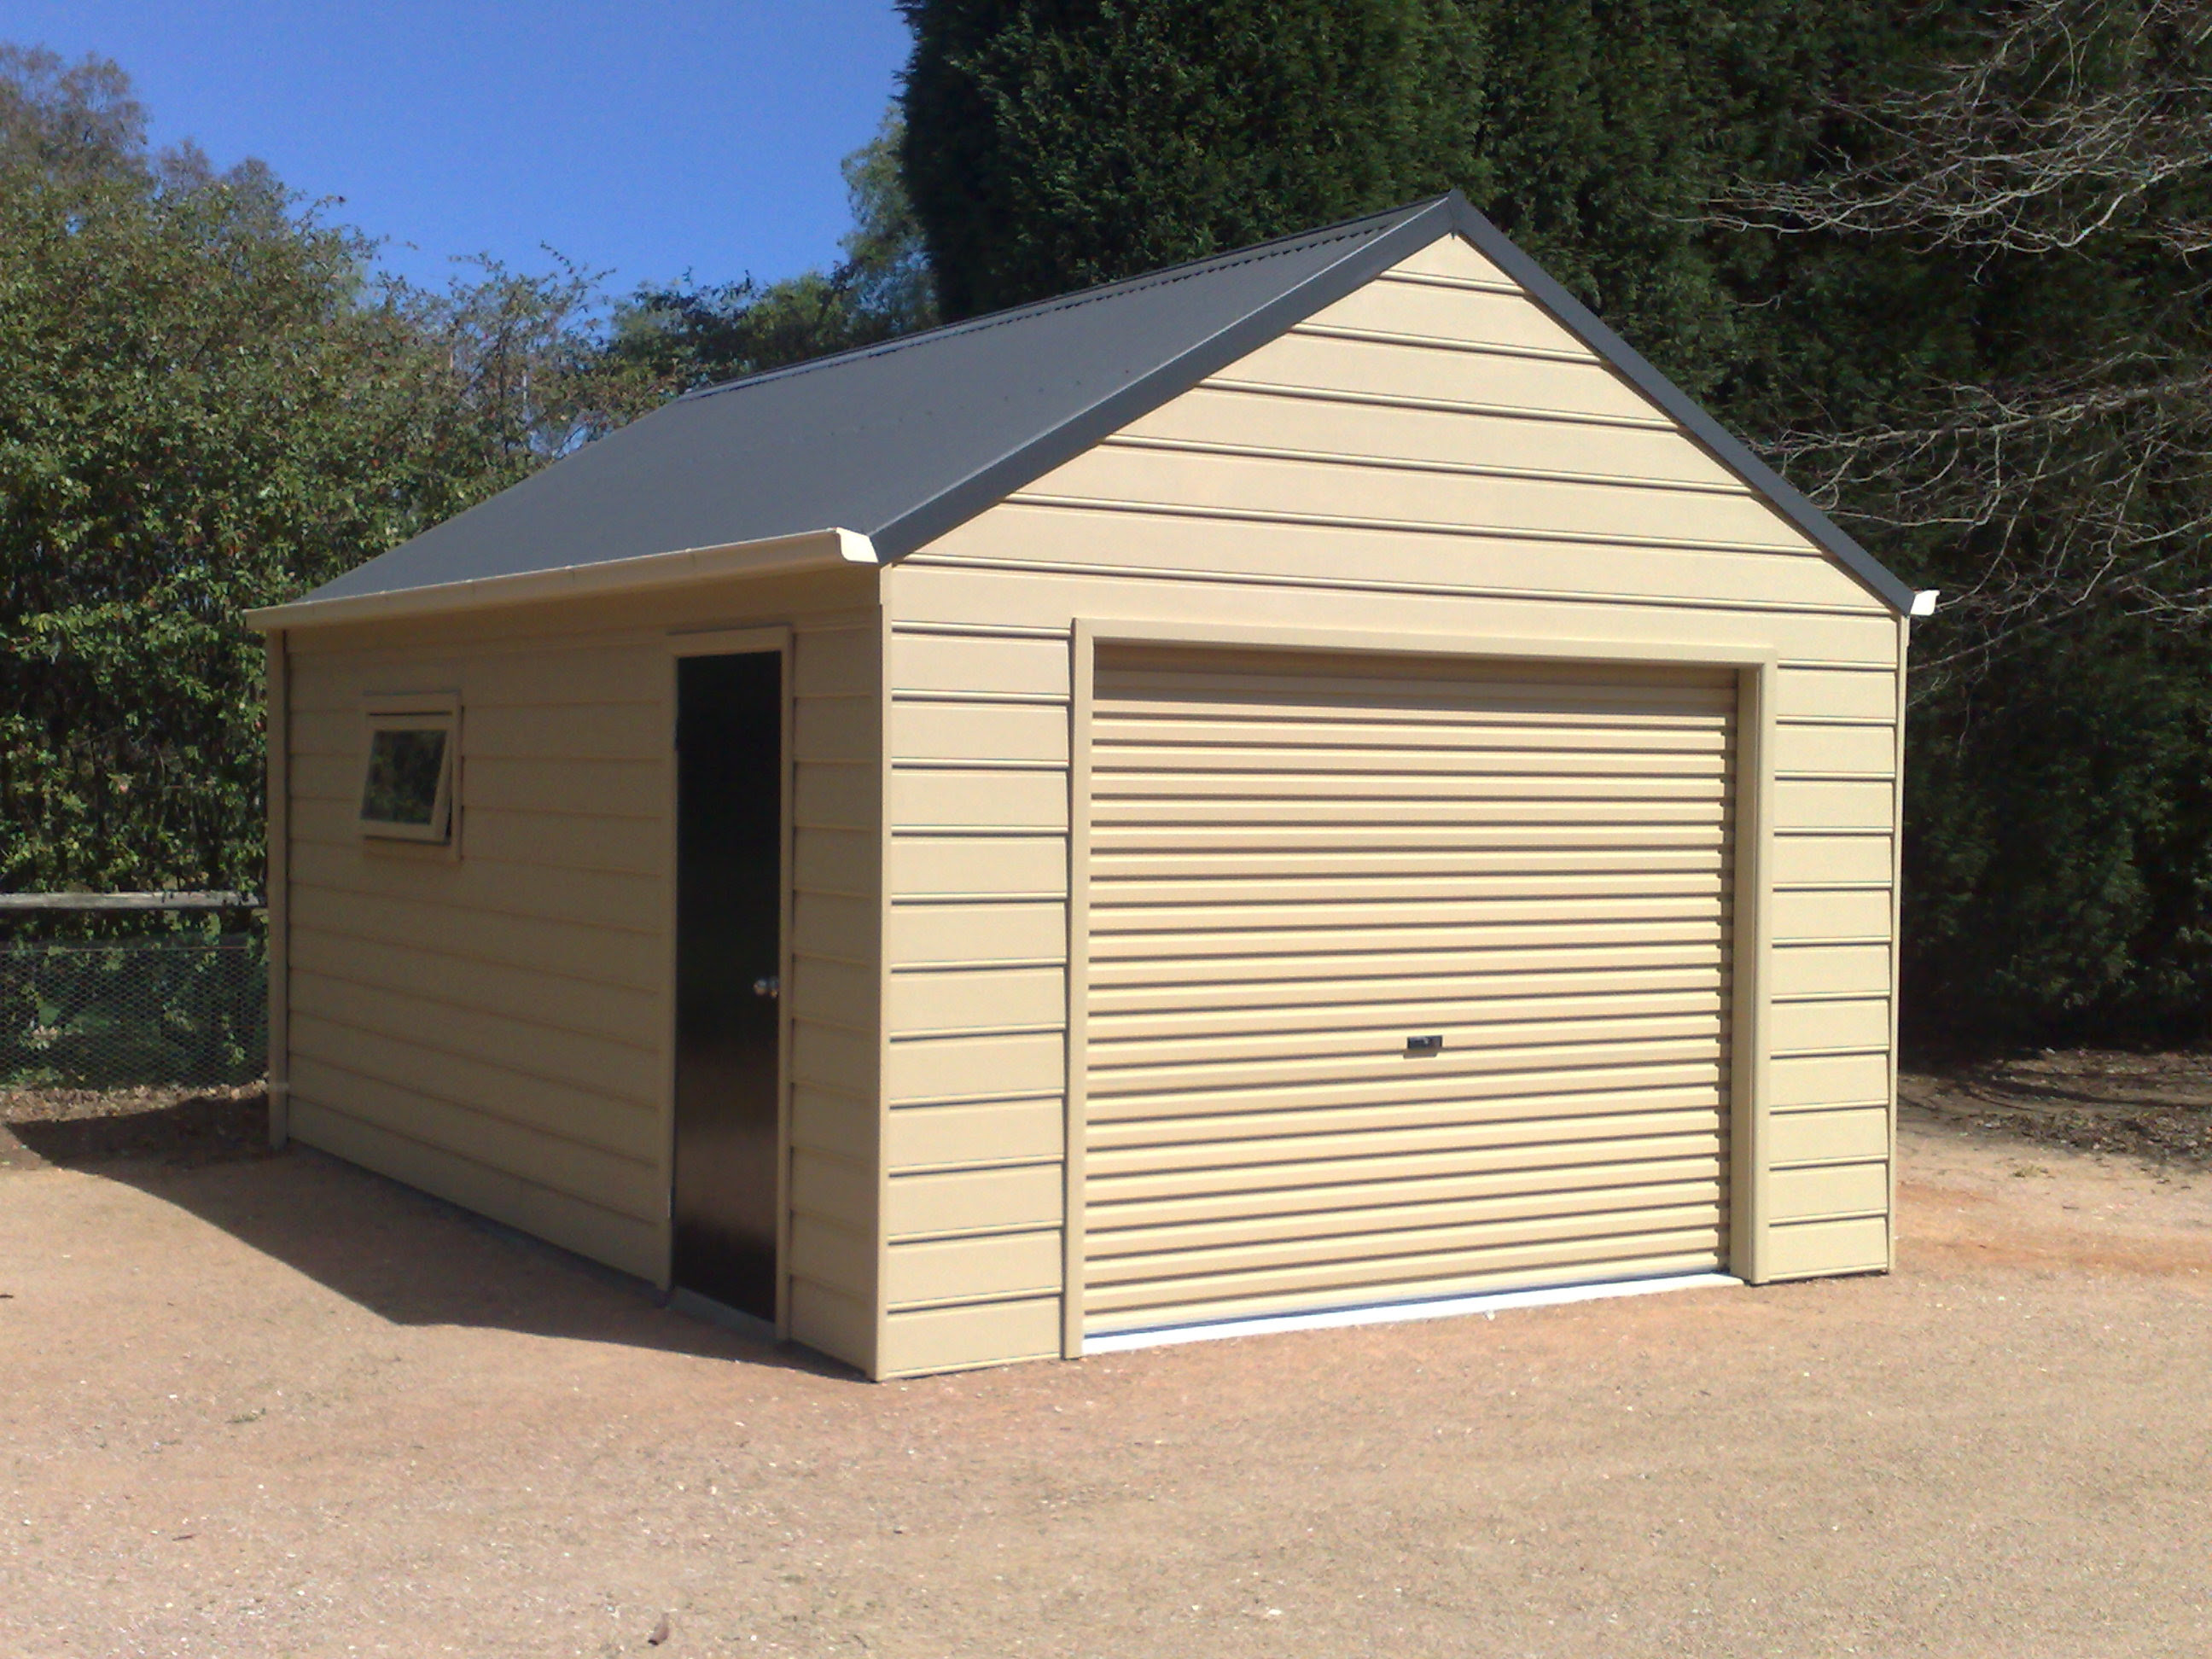 galid: how much does it cost to build a shed 8x10